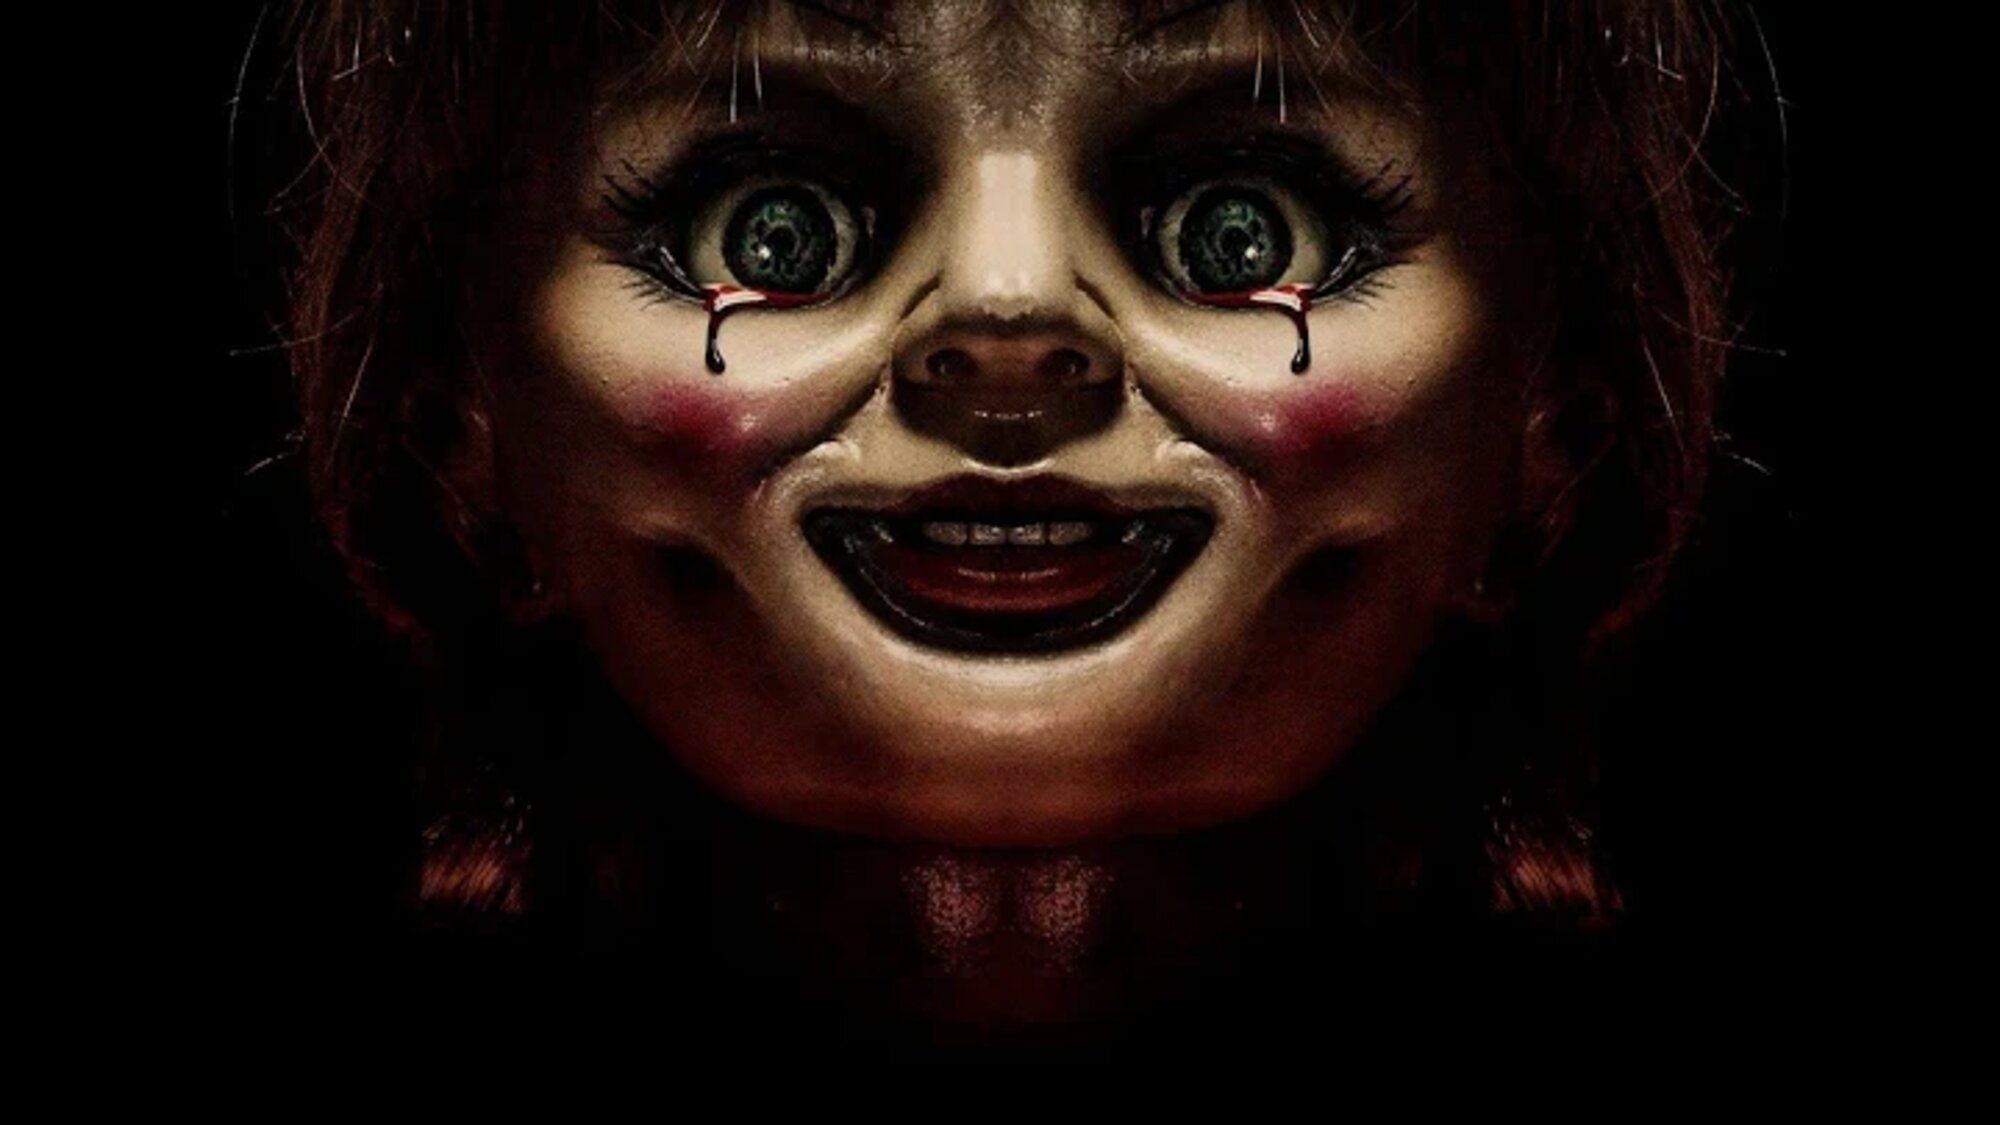 The real Annabelle doll didn't escape: Where is she locked up?